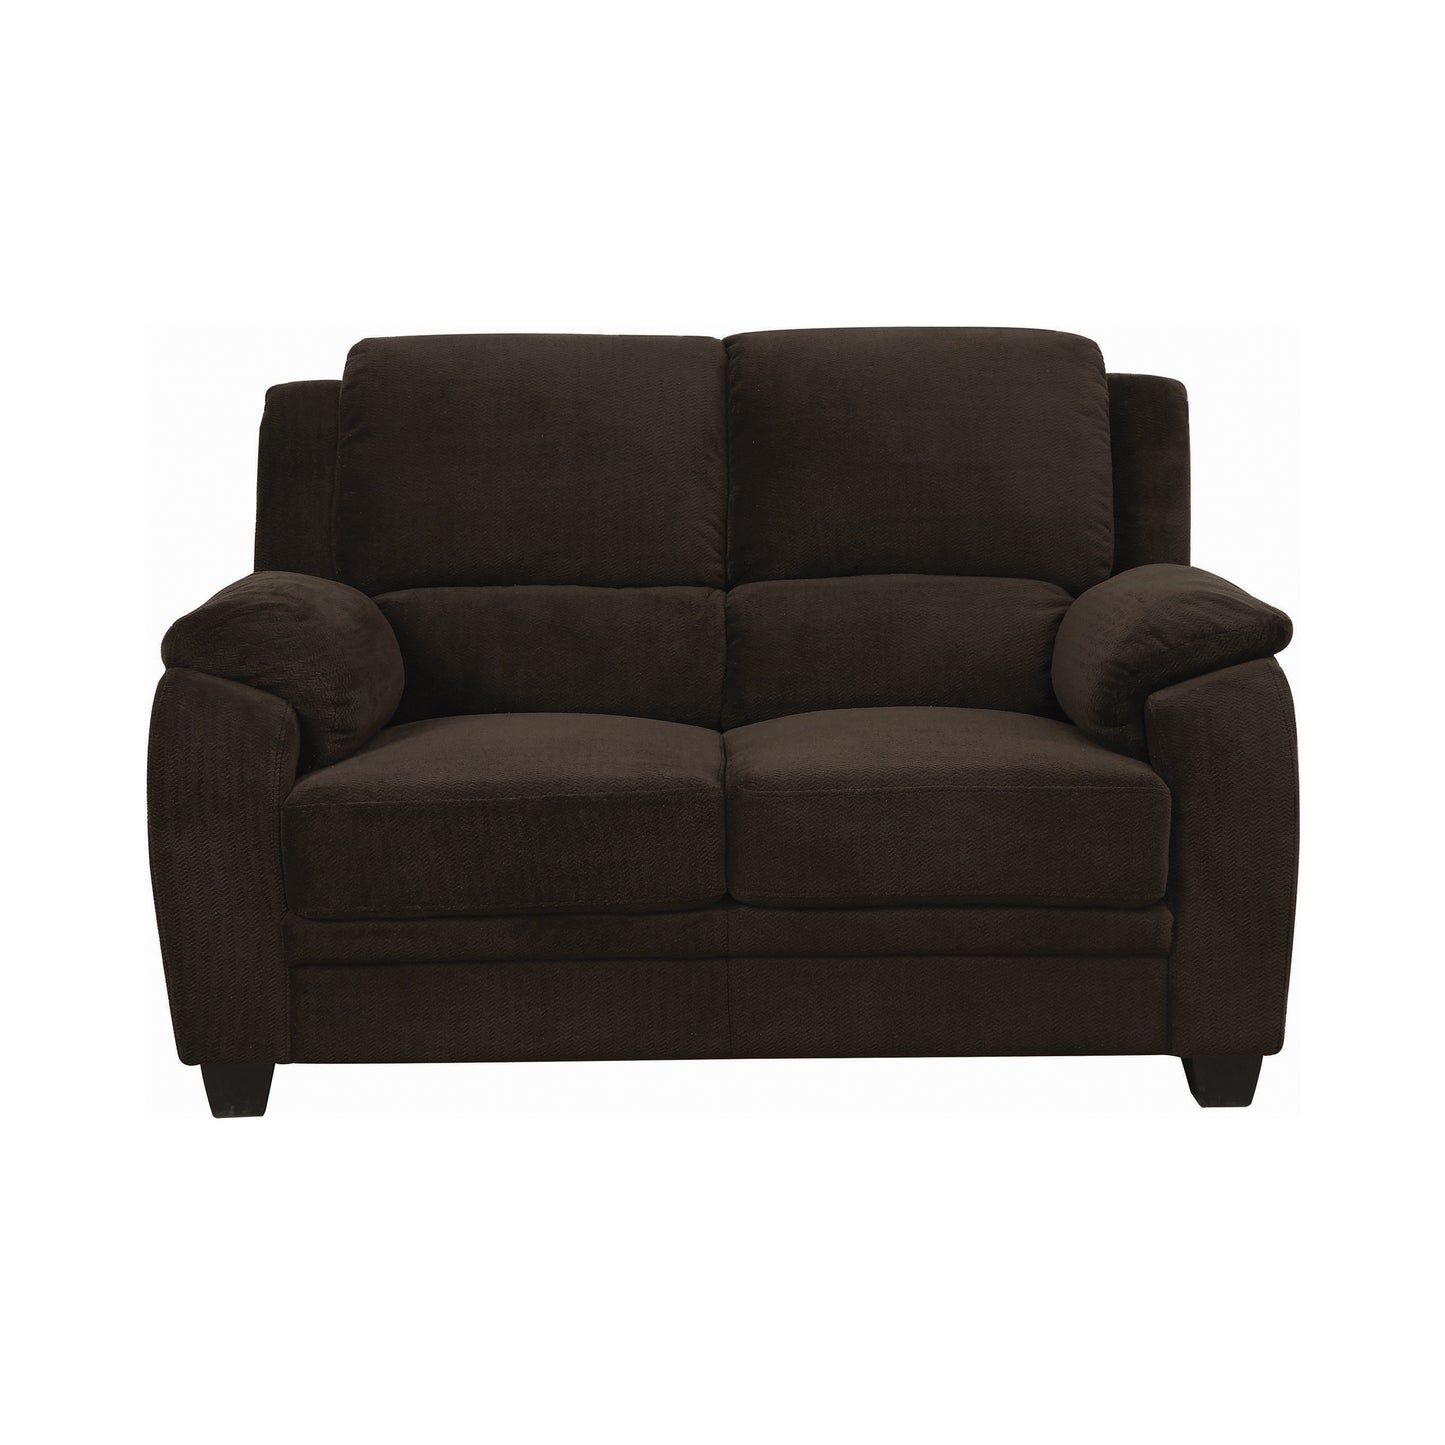 Northend Upholstered Loveseat Chocolate